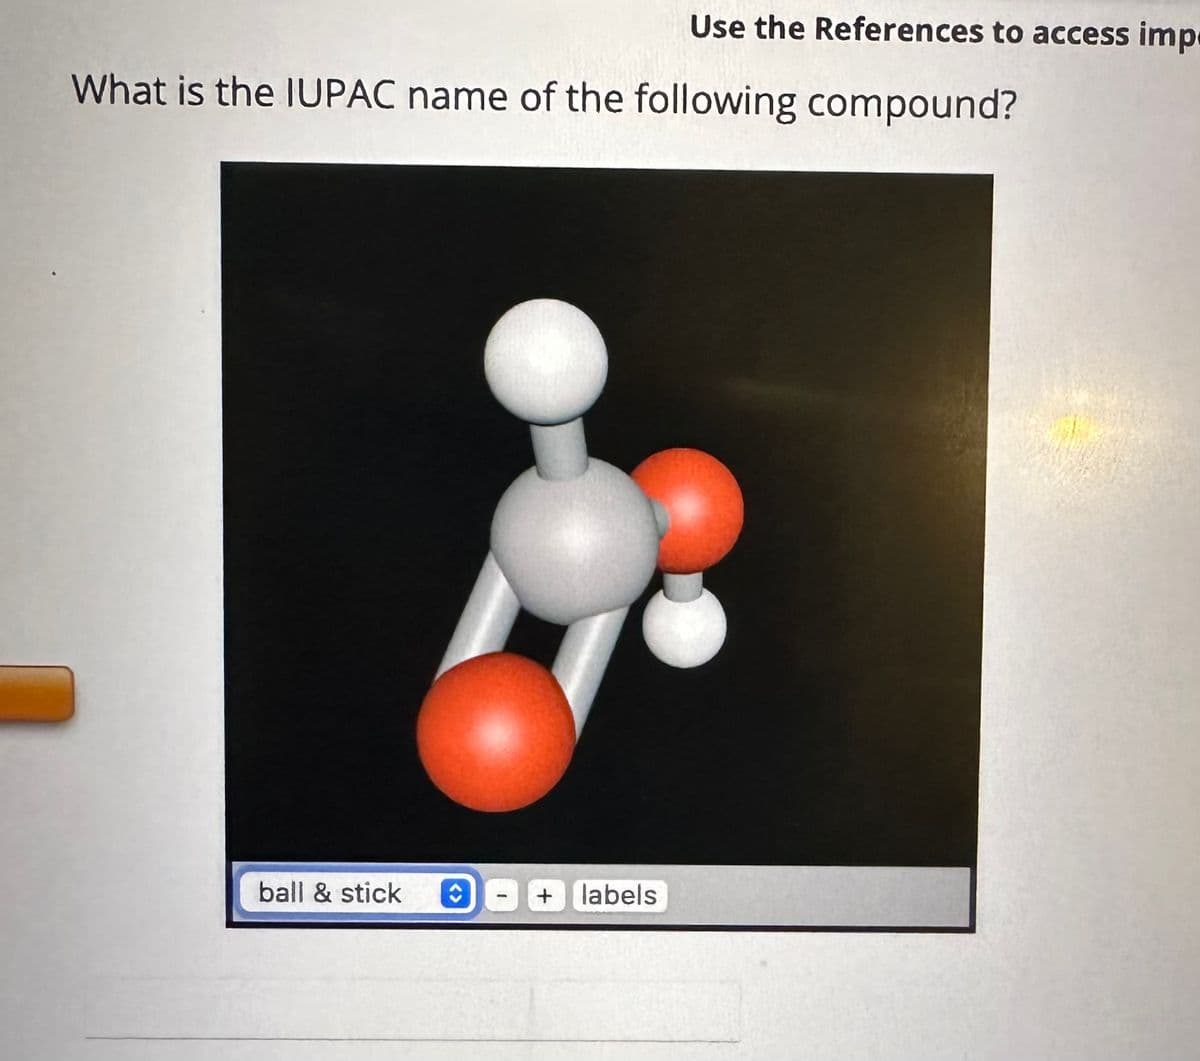 What is the IUPAC name of the following compound?
ball & stick ↑
+
Use the References to access imp
labels